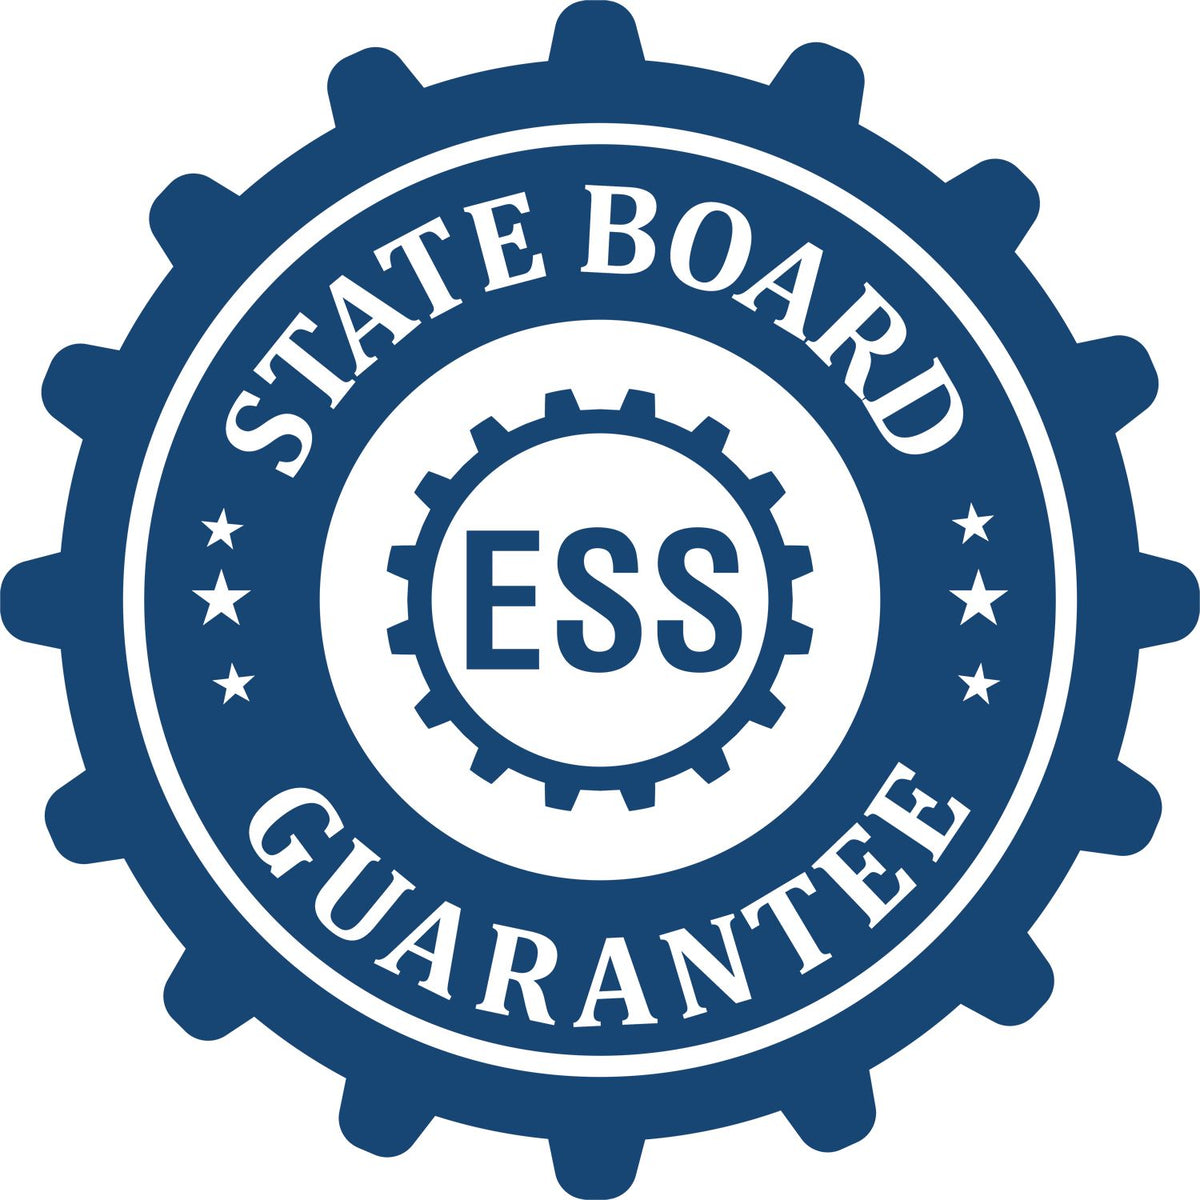 An emblem in a gear shape illustrating a state board guarantee for the Heavy-Duty Utah Rectangular Notary Stamp product.